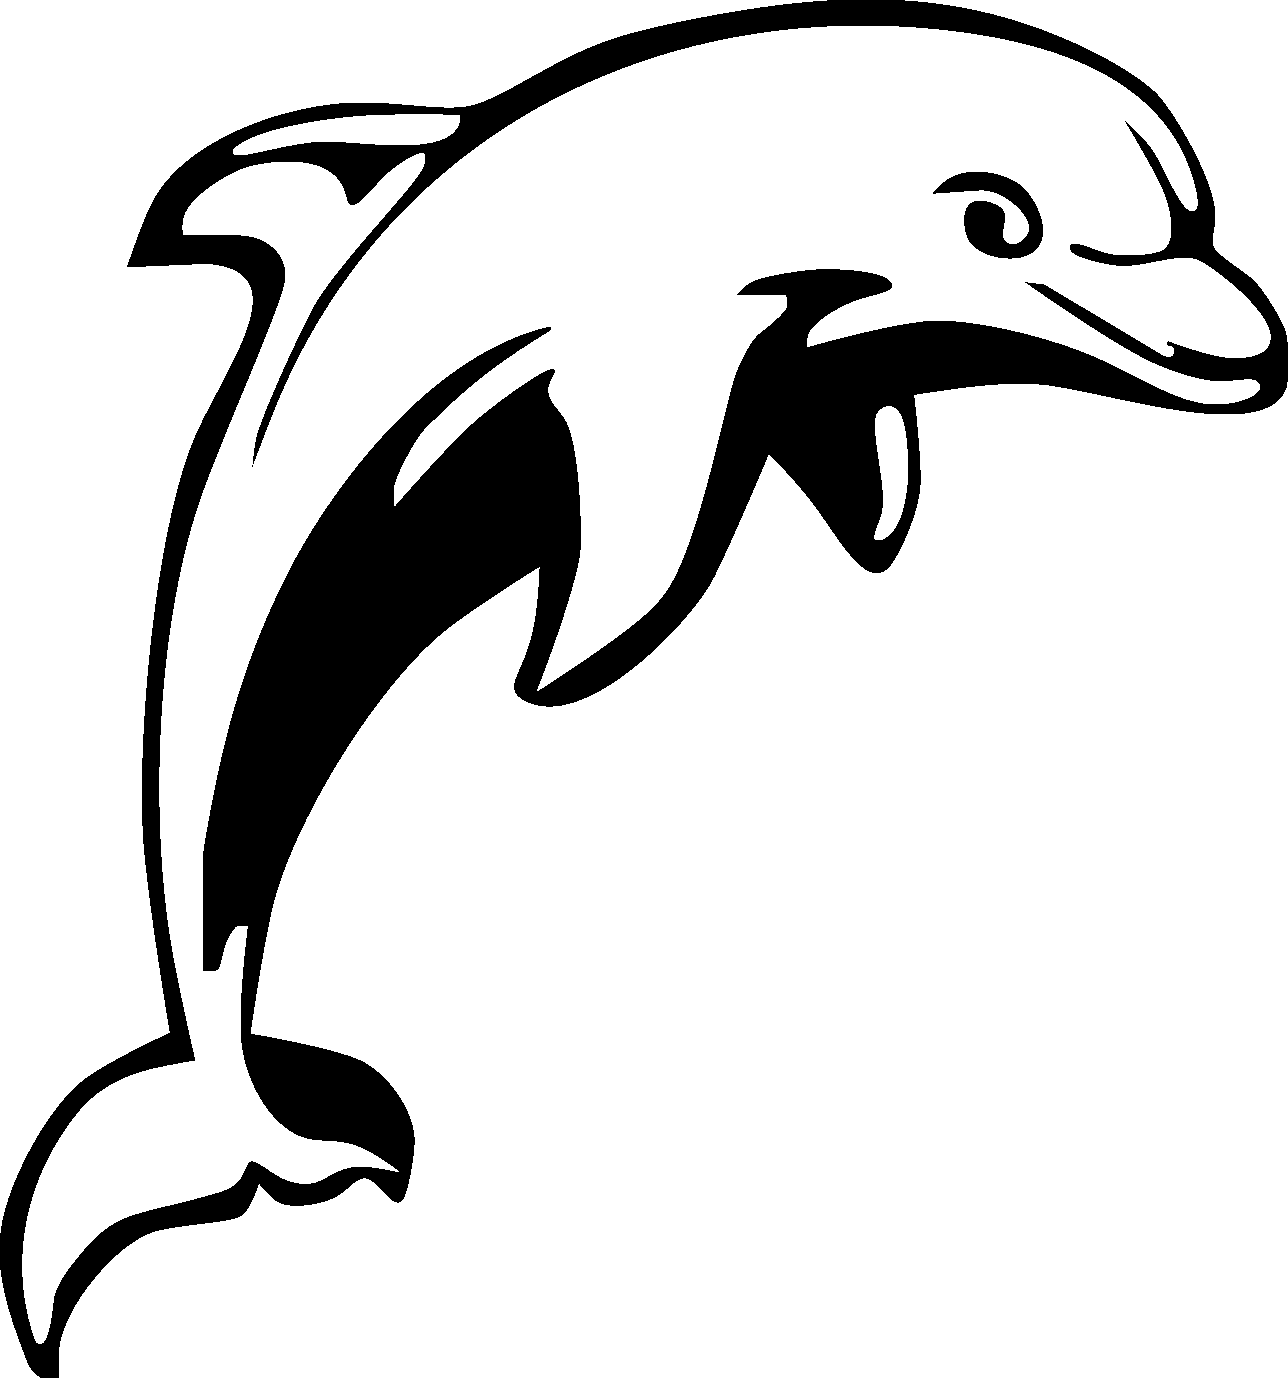 Tribal sea animal tattoos. Dolphins clipart dancing dolphin